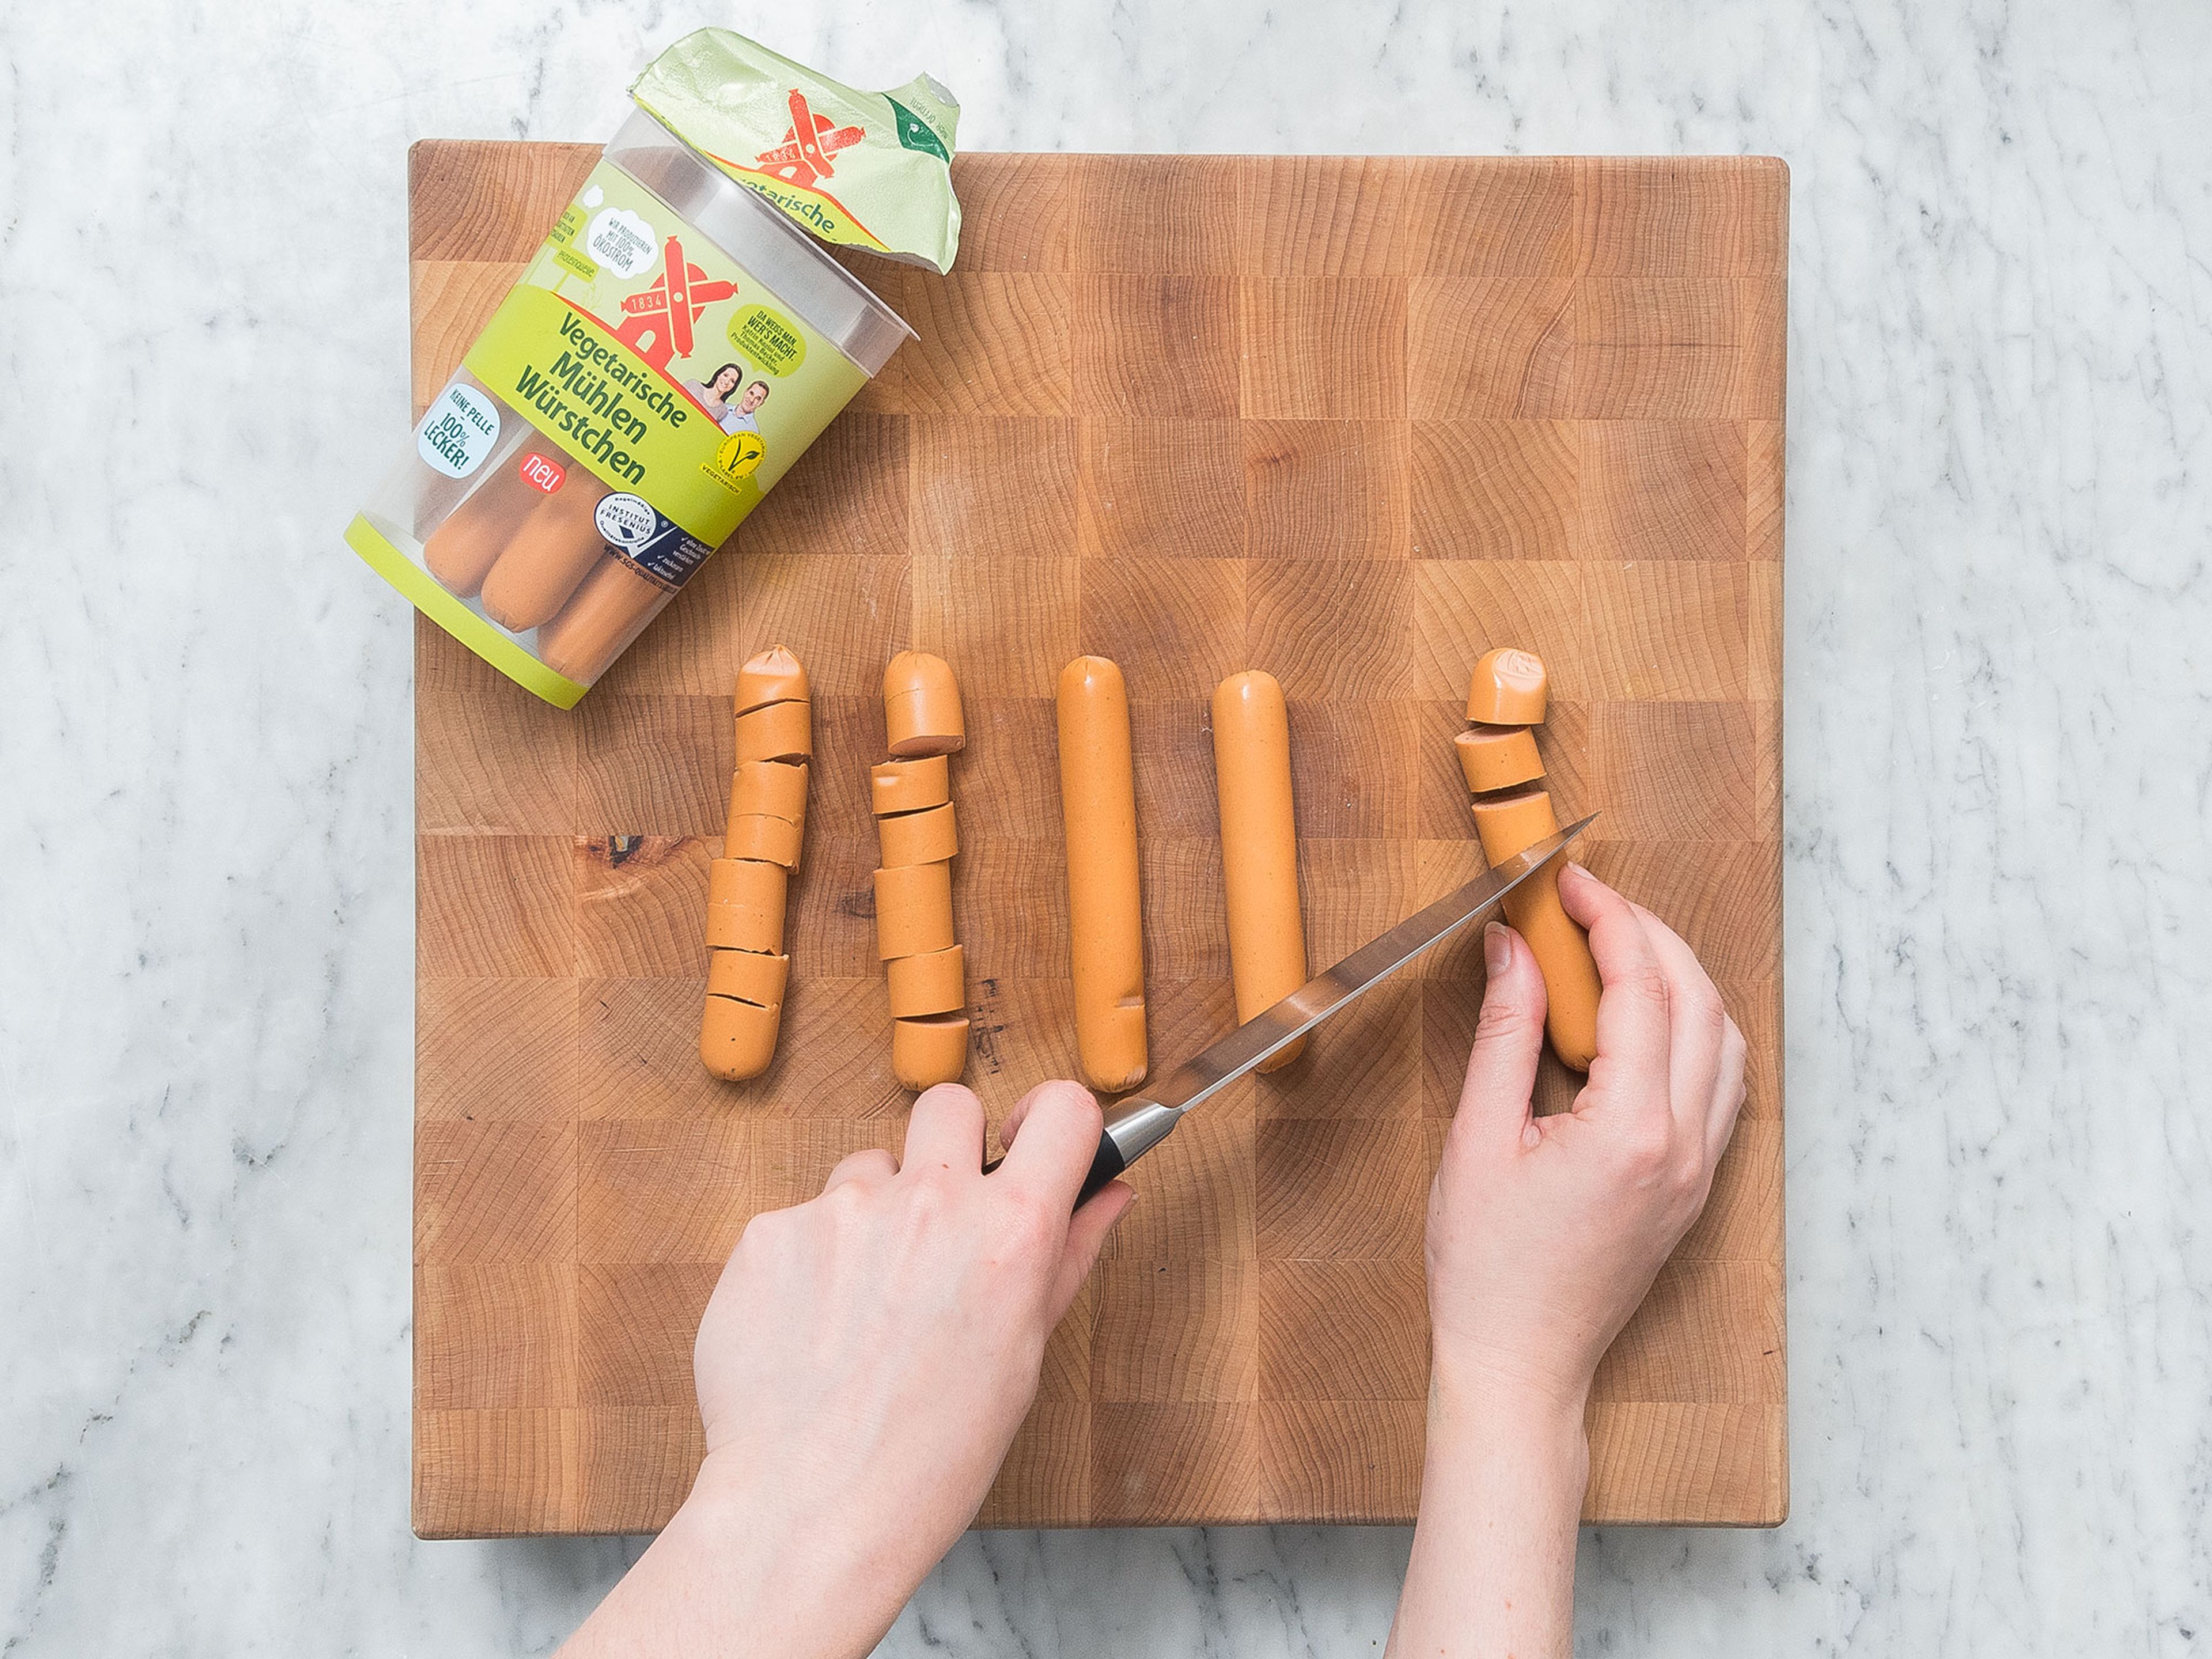 Slice vegetarian sausages. Heat oil in a frying pan and fry slices for approx. 4 – 5 min.